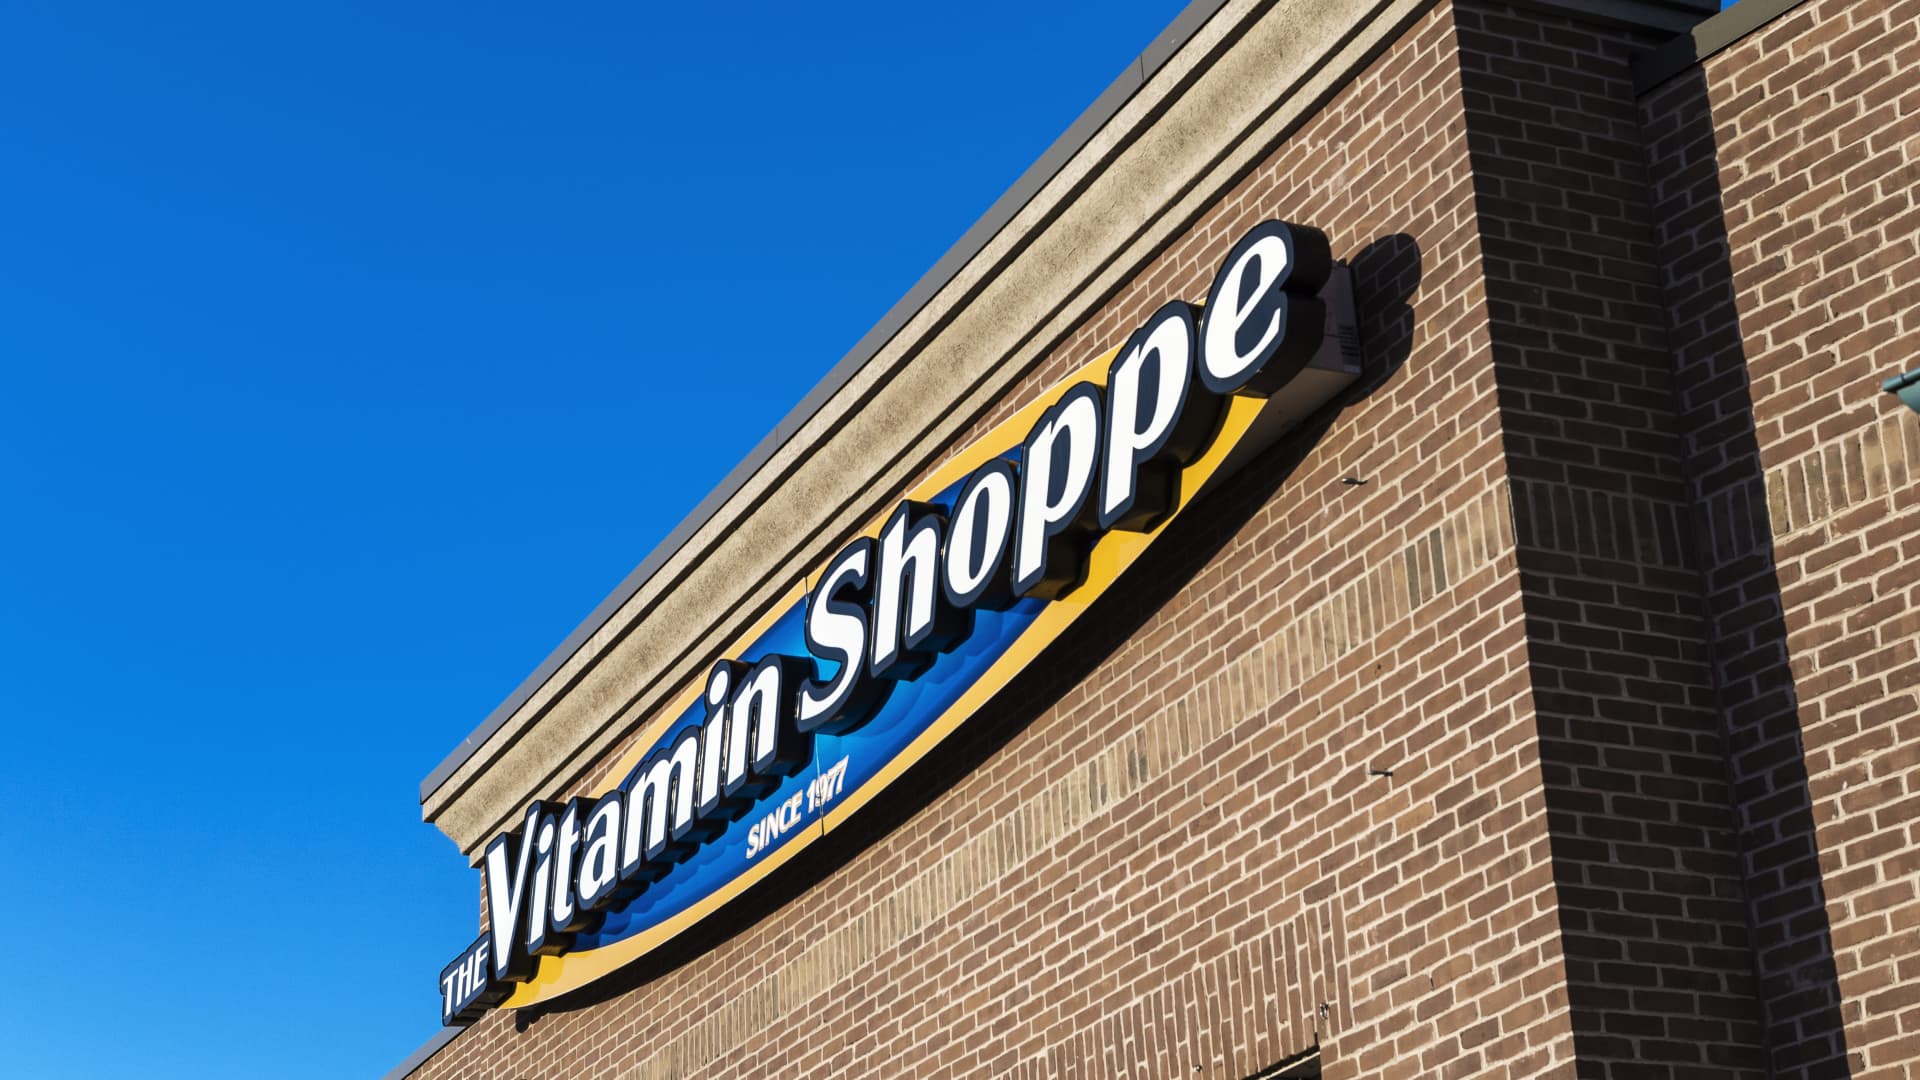 GLP-1 weight loss boom spurs protein sales, Vitamin Shoppe says [Video]